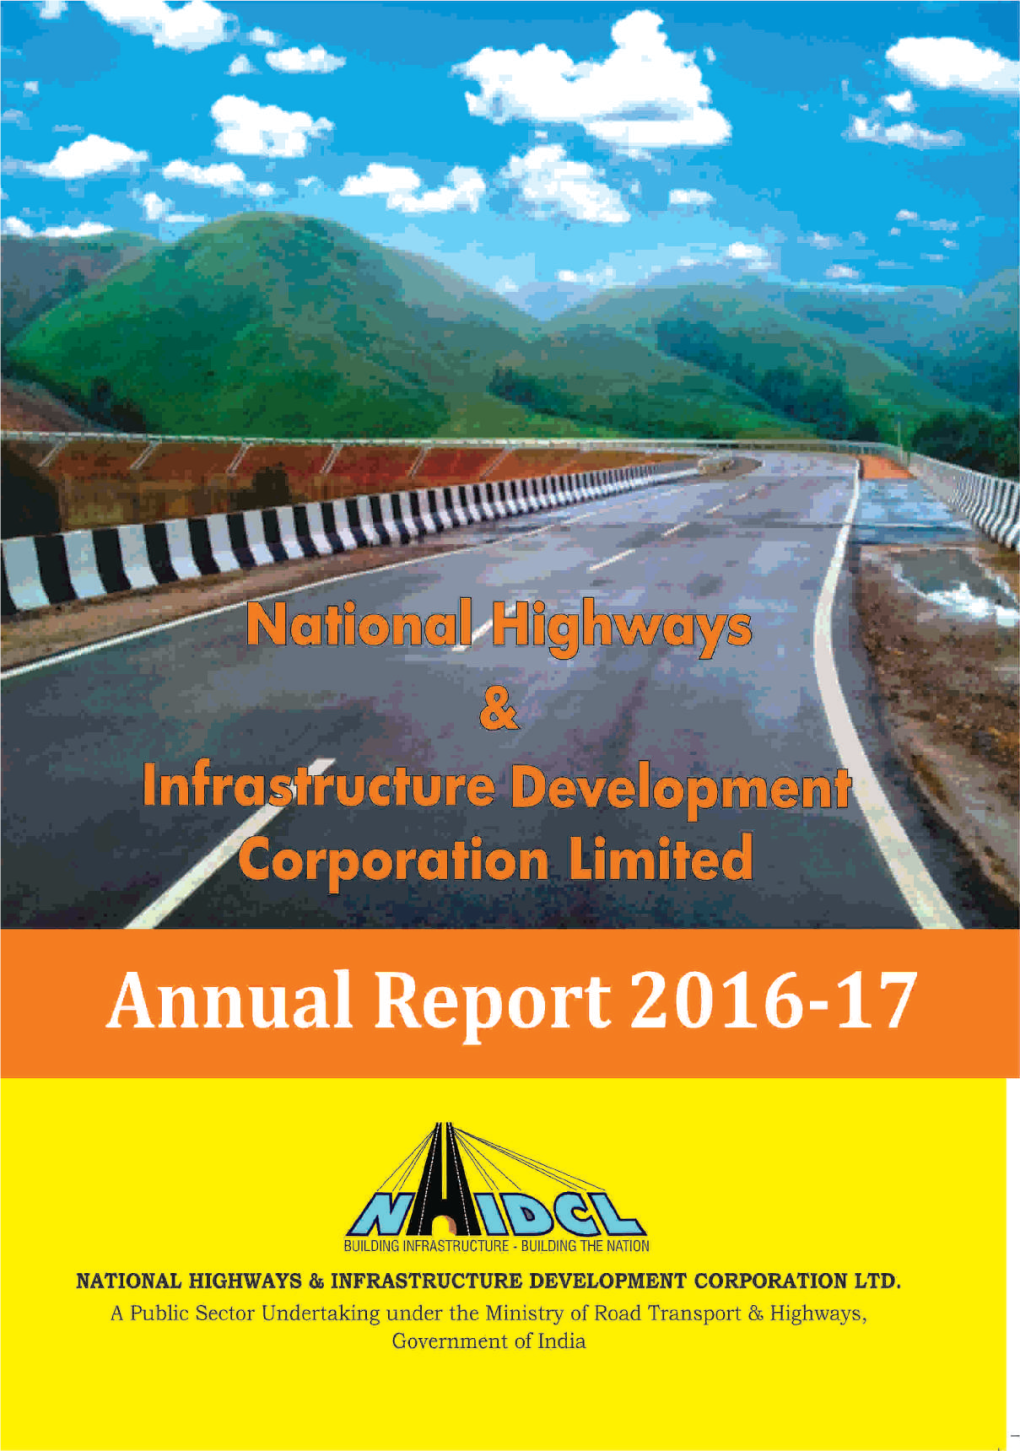 Annual Reports of NHIDCL (7.79 Mb )